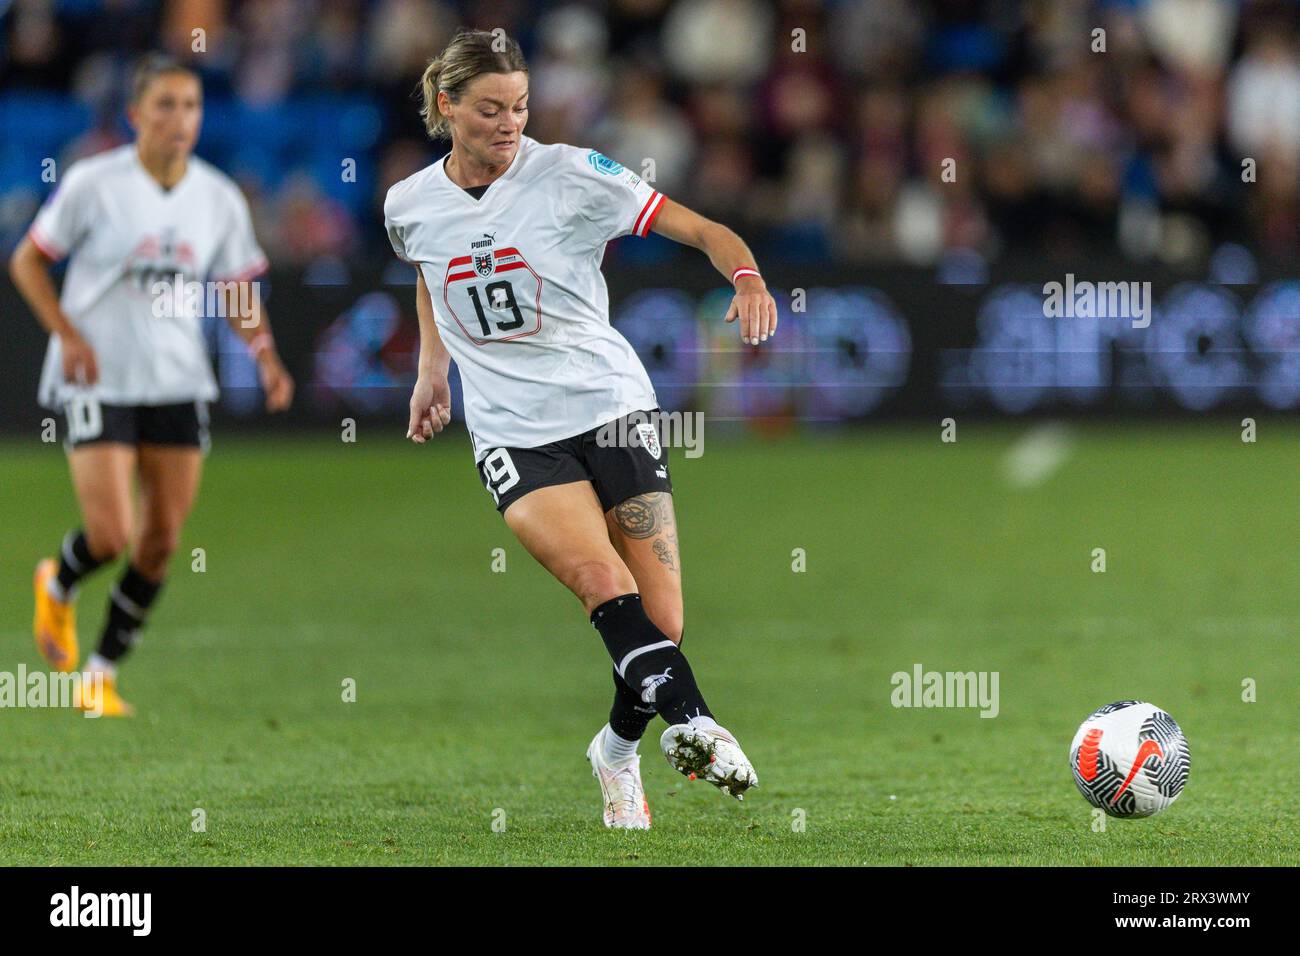 Oslo, Norway 22 September 2023 Verena Hanshaw of Austria manoeuvres the ball during the UEFA Womens Nations League Group A2 match between Norway and Austria held at the Ullevaal Stadion in Oslo, Norway credit: Nigel Waldron/Alamy Live News Stock Photo